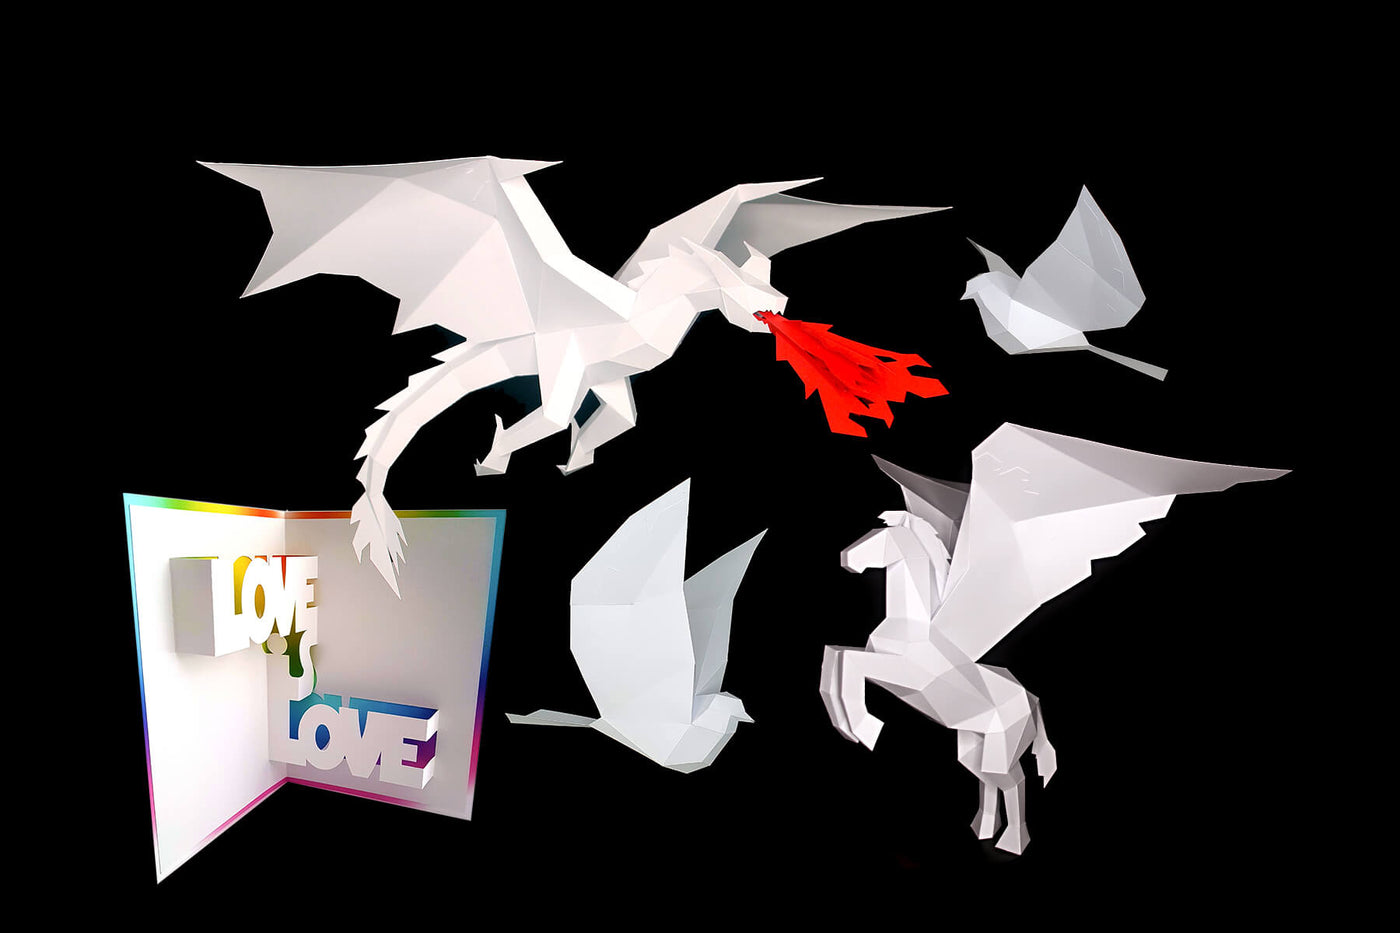 3D low-poly papercraft sculptures of dragon, bat, bird and Pegasus horse. Designed by Kostas Ntanos. Made by you. Download the template and make your own DIY paper sculptures. Beautiful 3D papercraft designs made by you. 